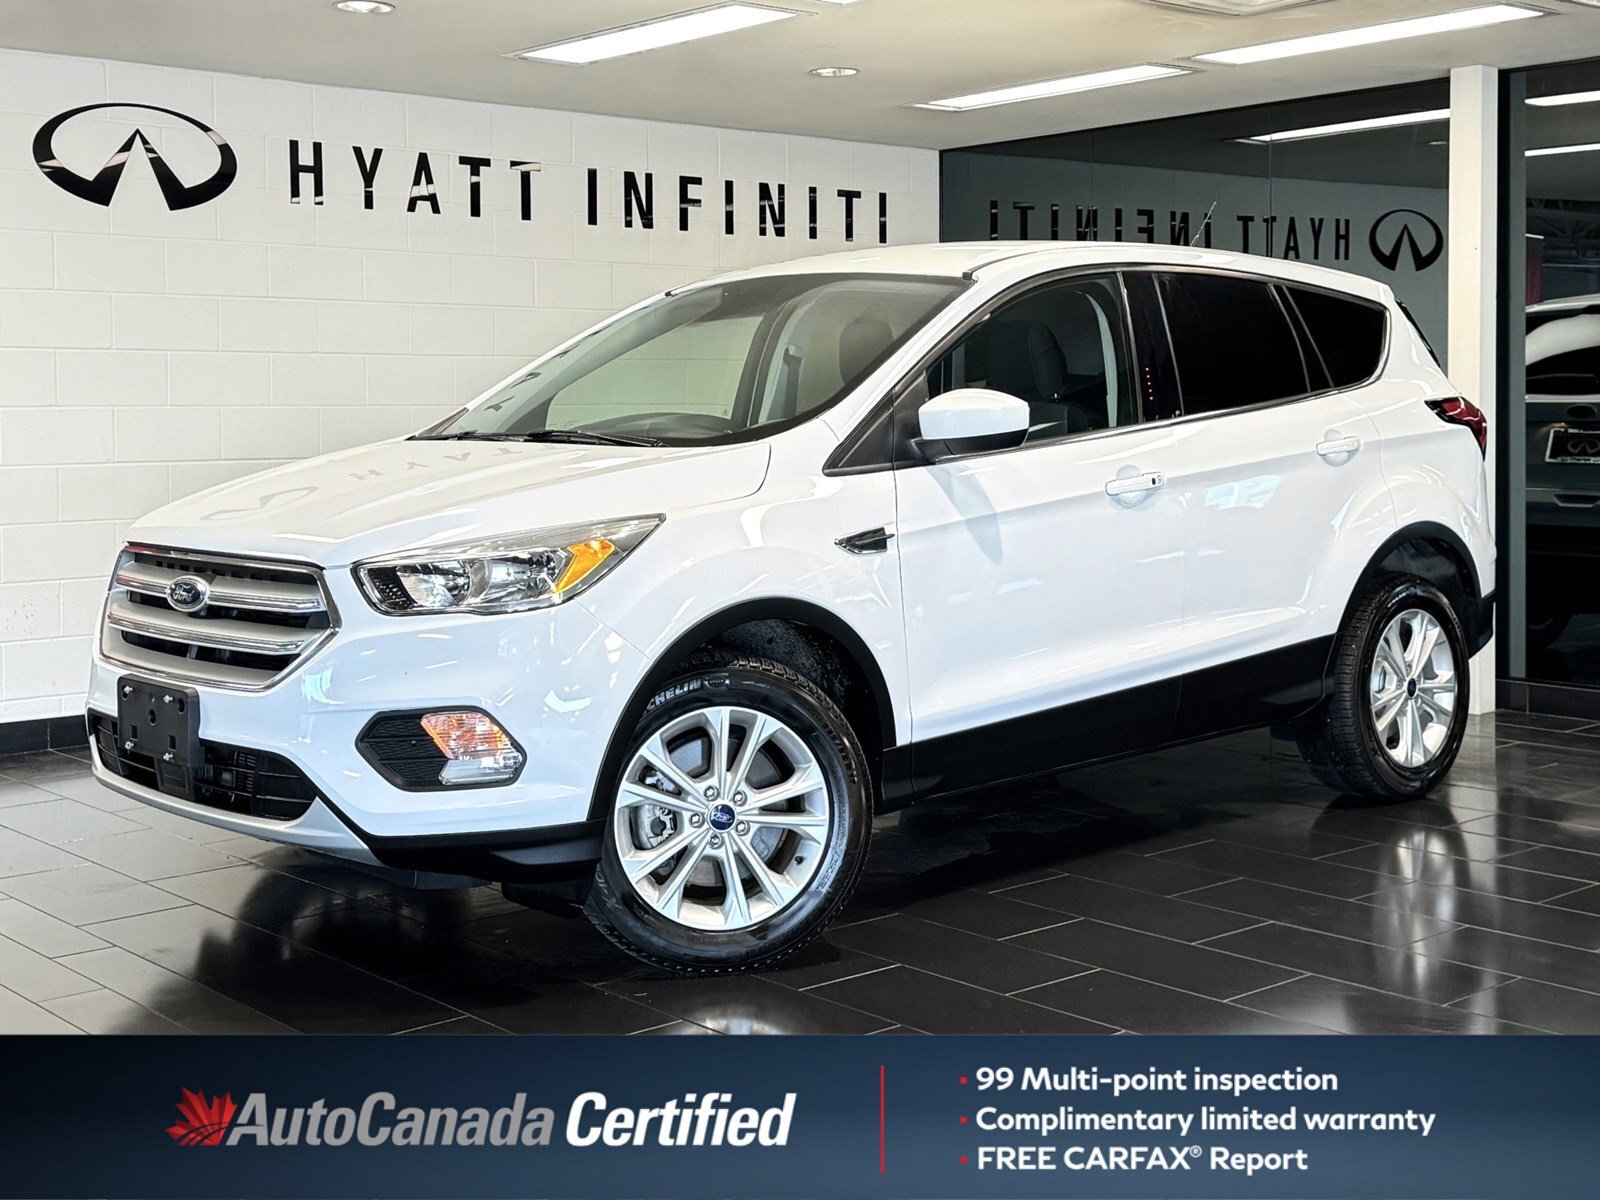 2019 Ford Escape SE - No Accidents | AWD | Heated Seats